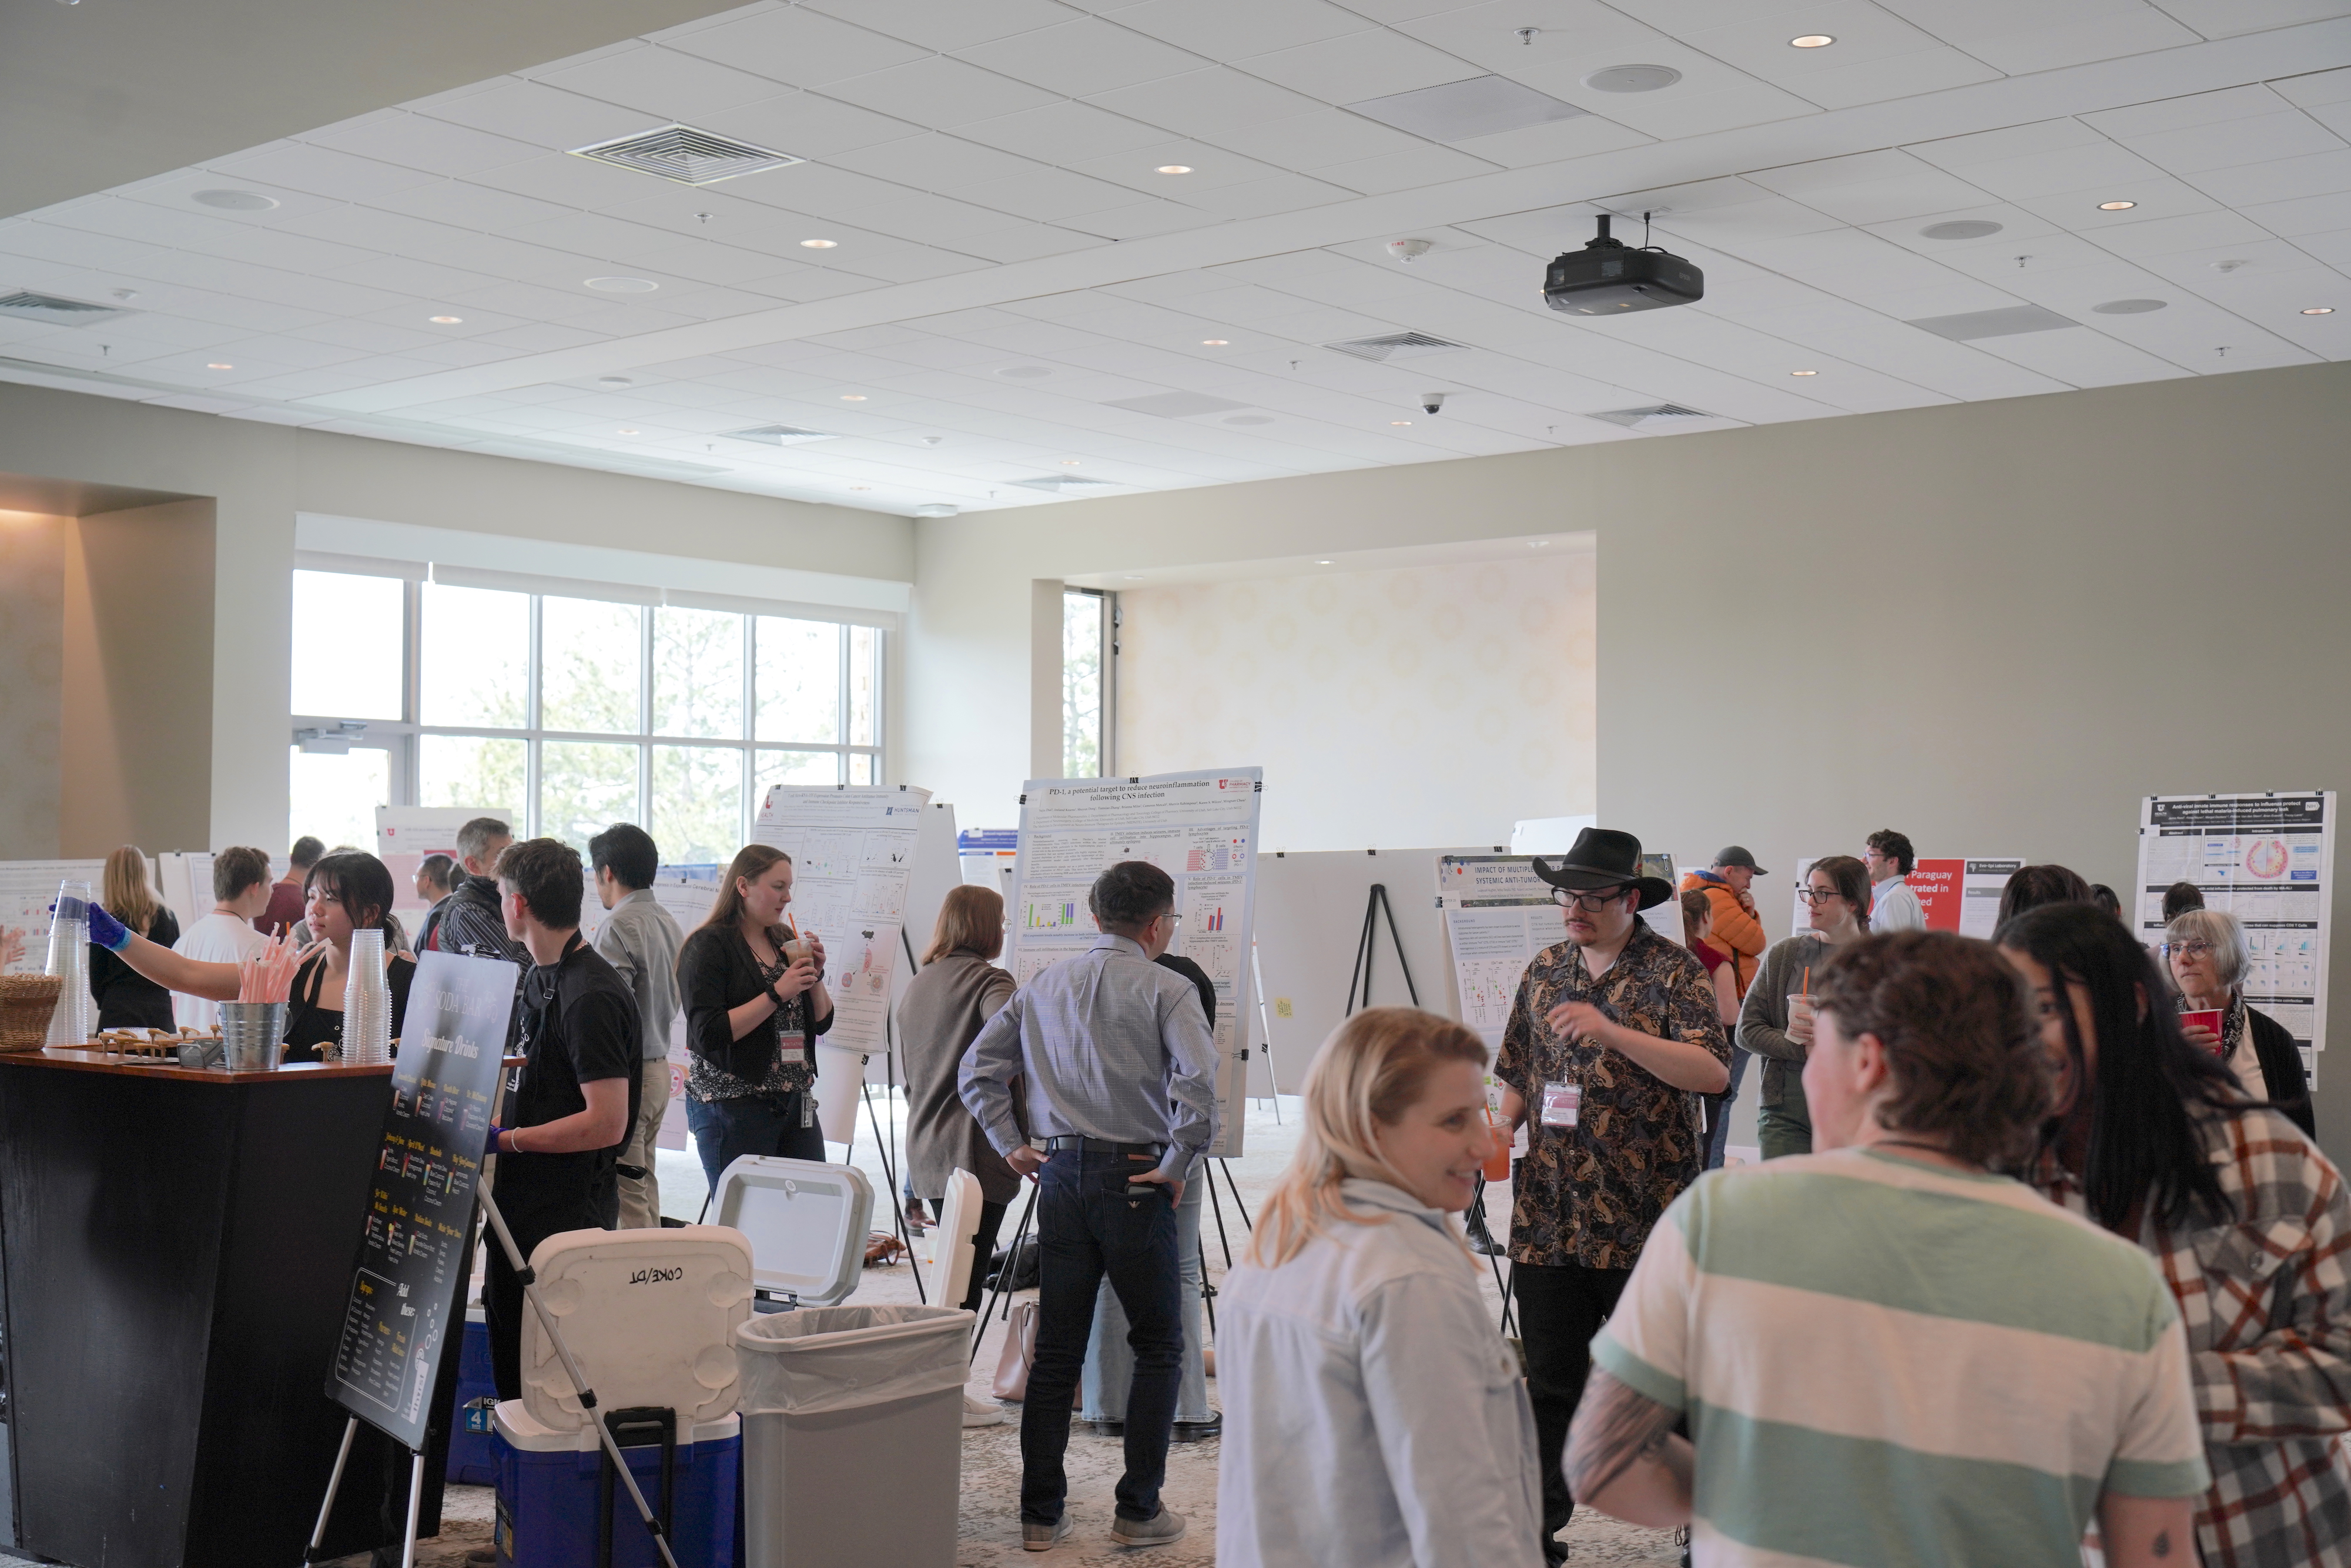 Scientists mingle and converse in a brightly-lit open poster forum.